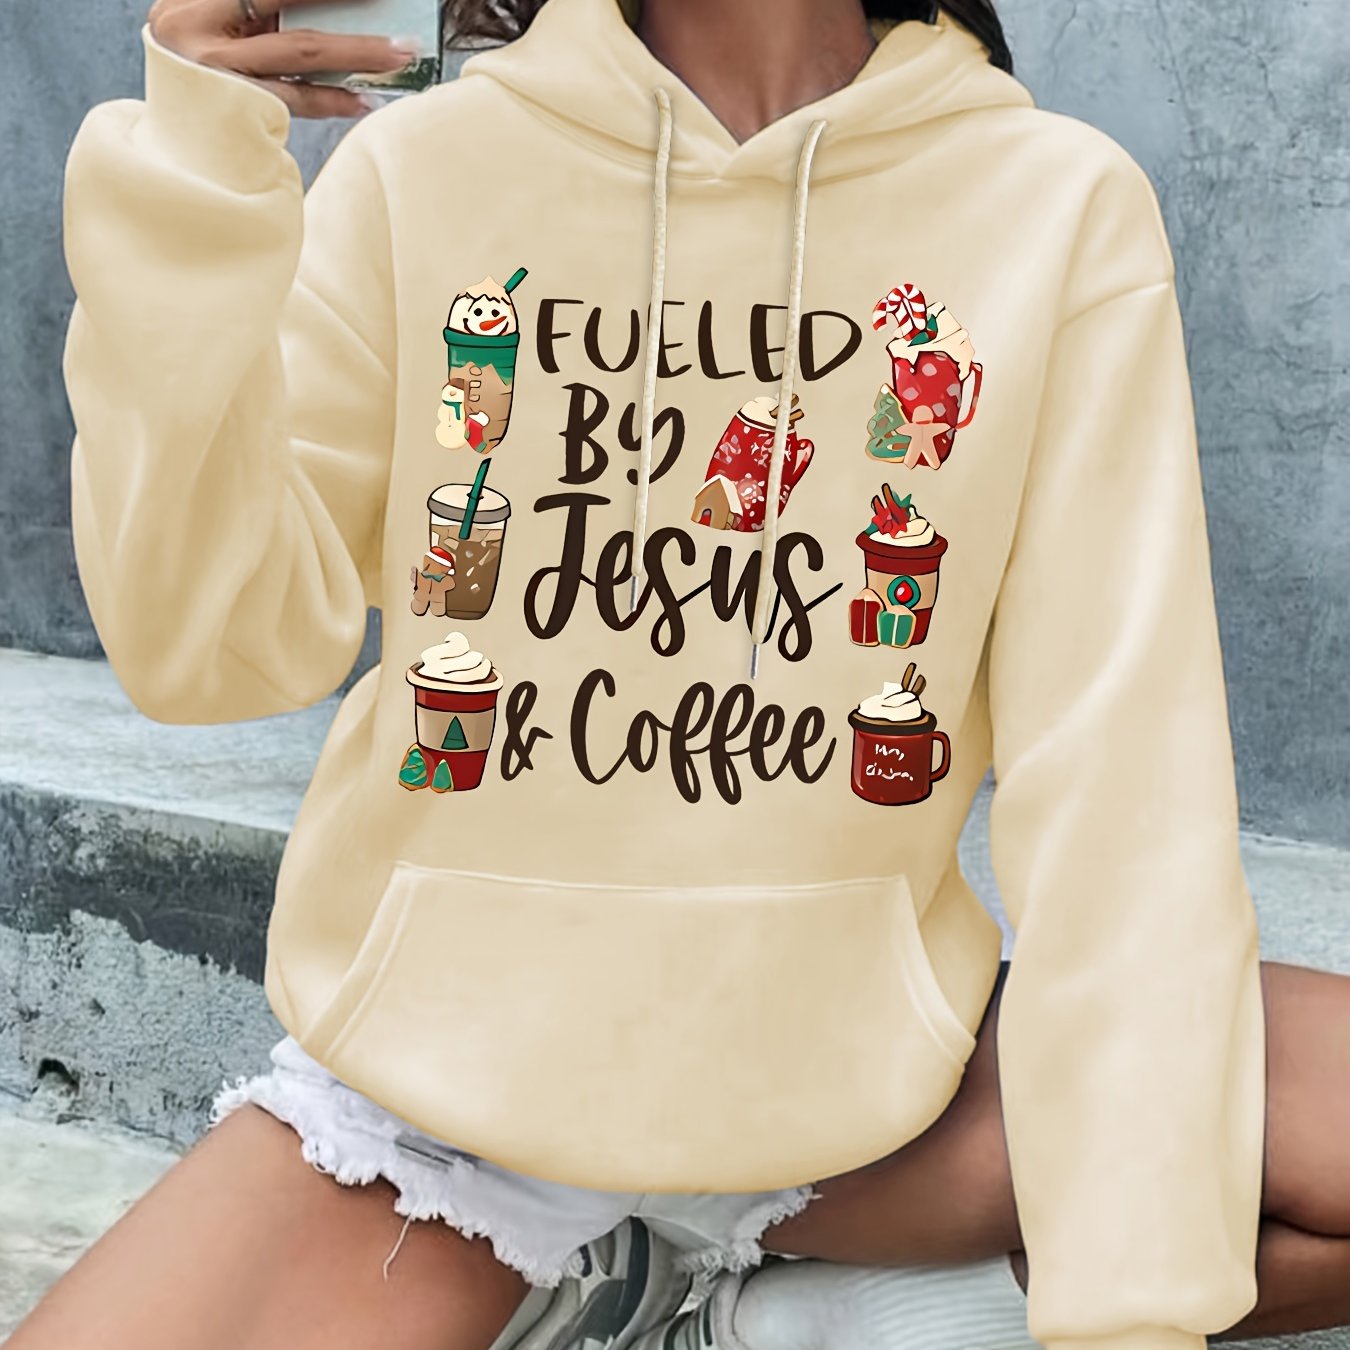 Fueled By Jesus & Coffee Women's Christian Pullover Hooded Sweatshirt claimedbygoddesigns